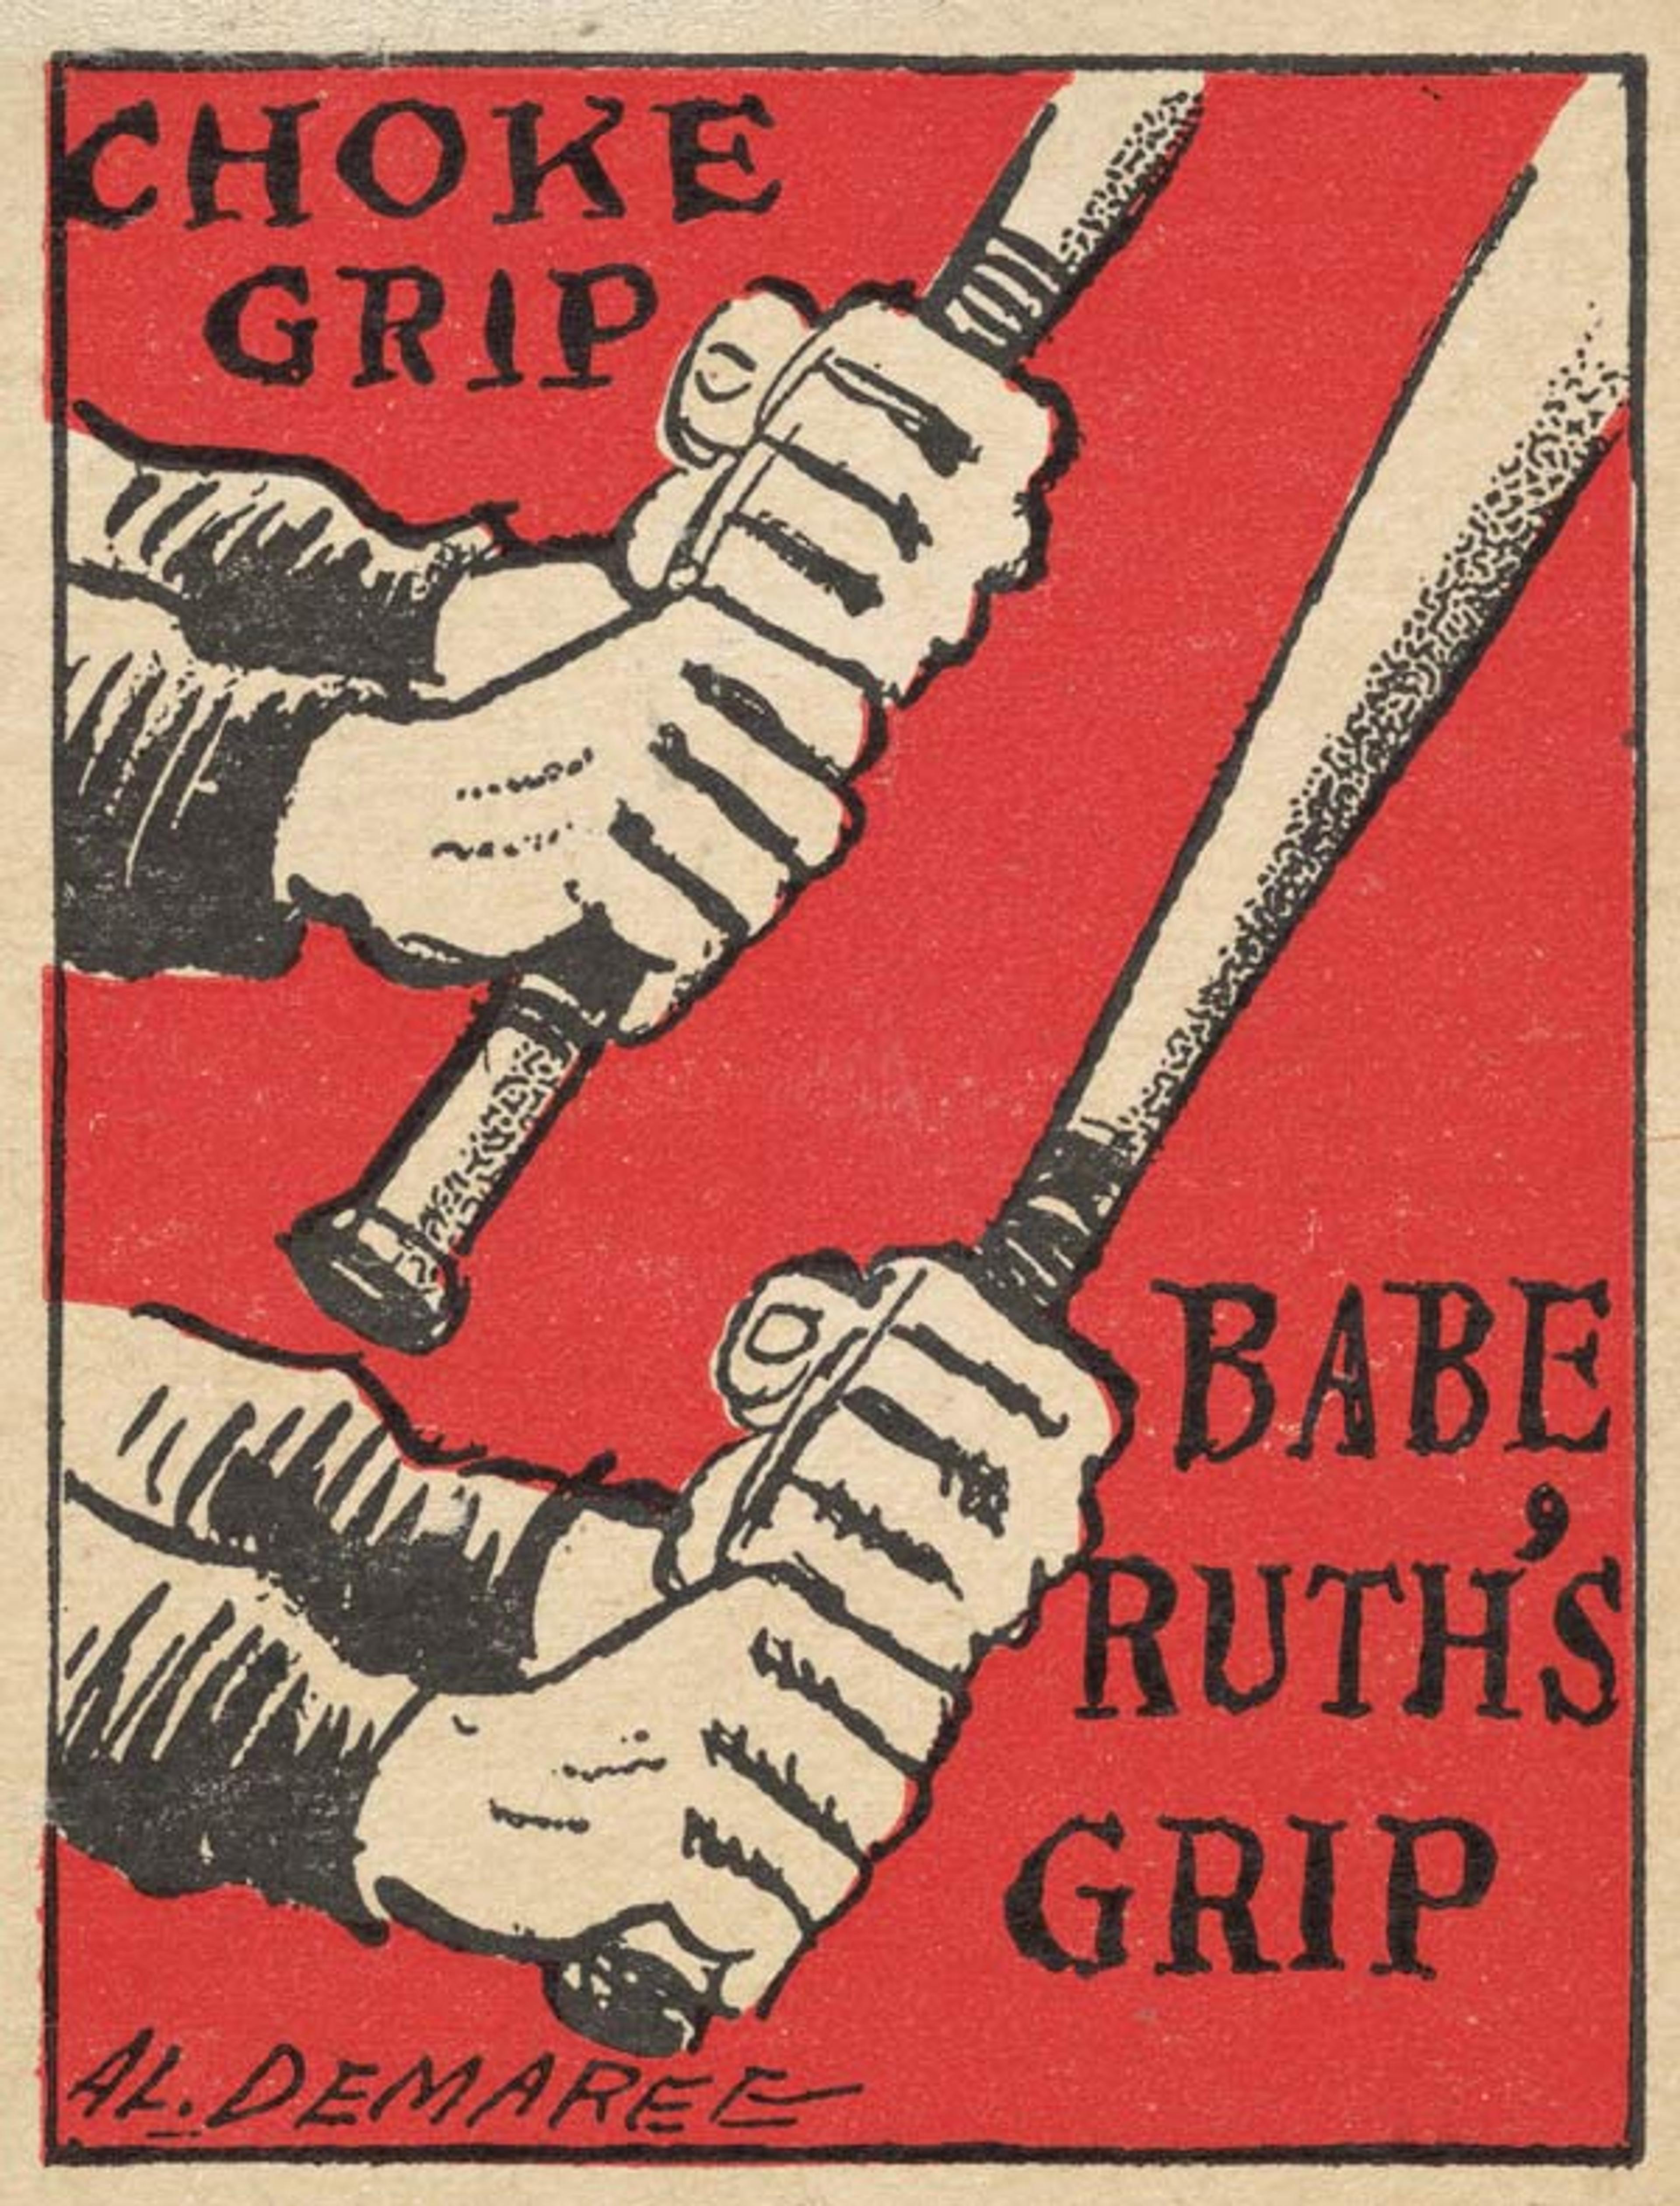 Schutter-Johnson Candy Corporation, Chicago, IL, Brooklyn, NY. Babe Ruth's Batting Tips, No. 42, baseball issue, 1935. Commercial color lithograph; Sheet: 2 7/8 x 2 1/4 in. (7.3 x 5.7 cm). The Metropolitan Museum of Art, New York, The Jefferson R. Burdick Collection, Gift of Jefferson R. Burdick (Burdick 325, R332.29)